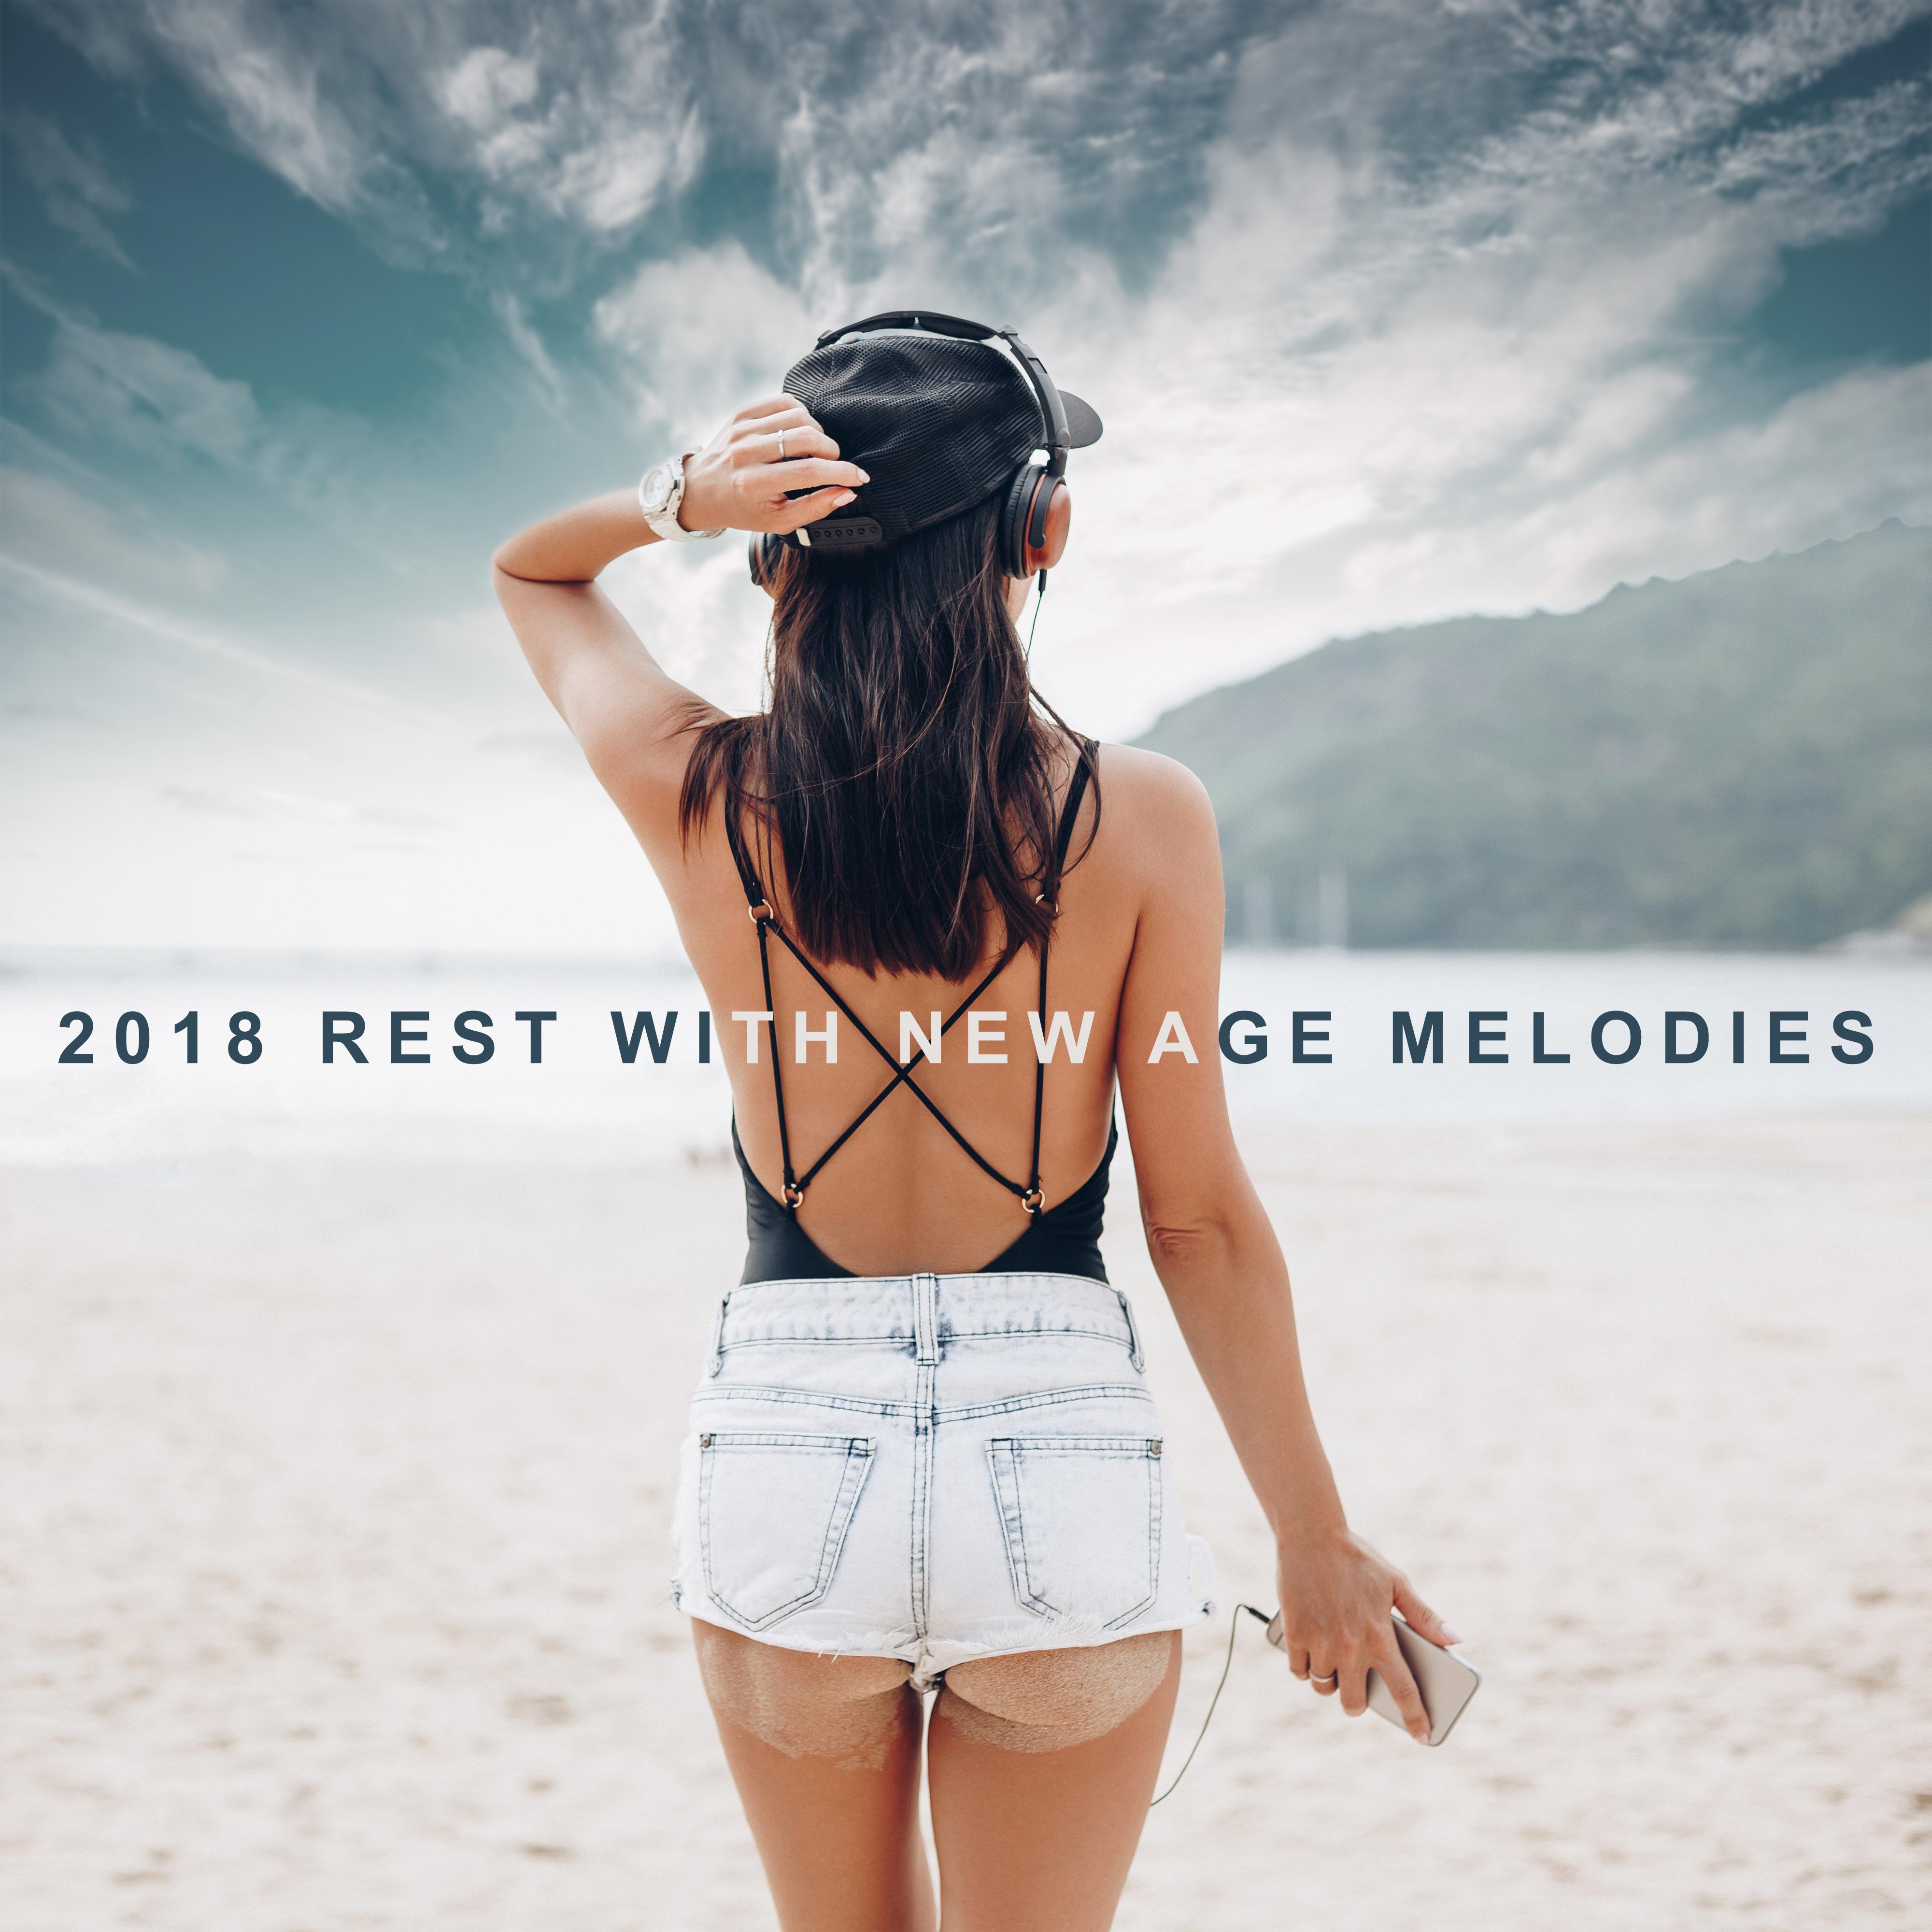 2018 Rest with New Age Melodies